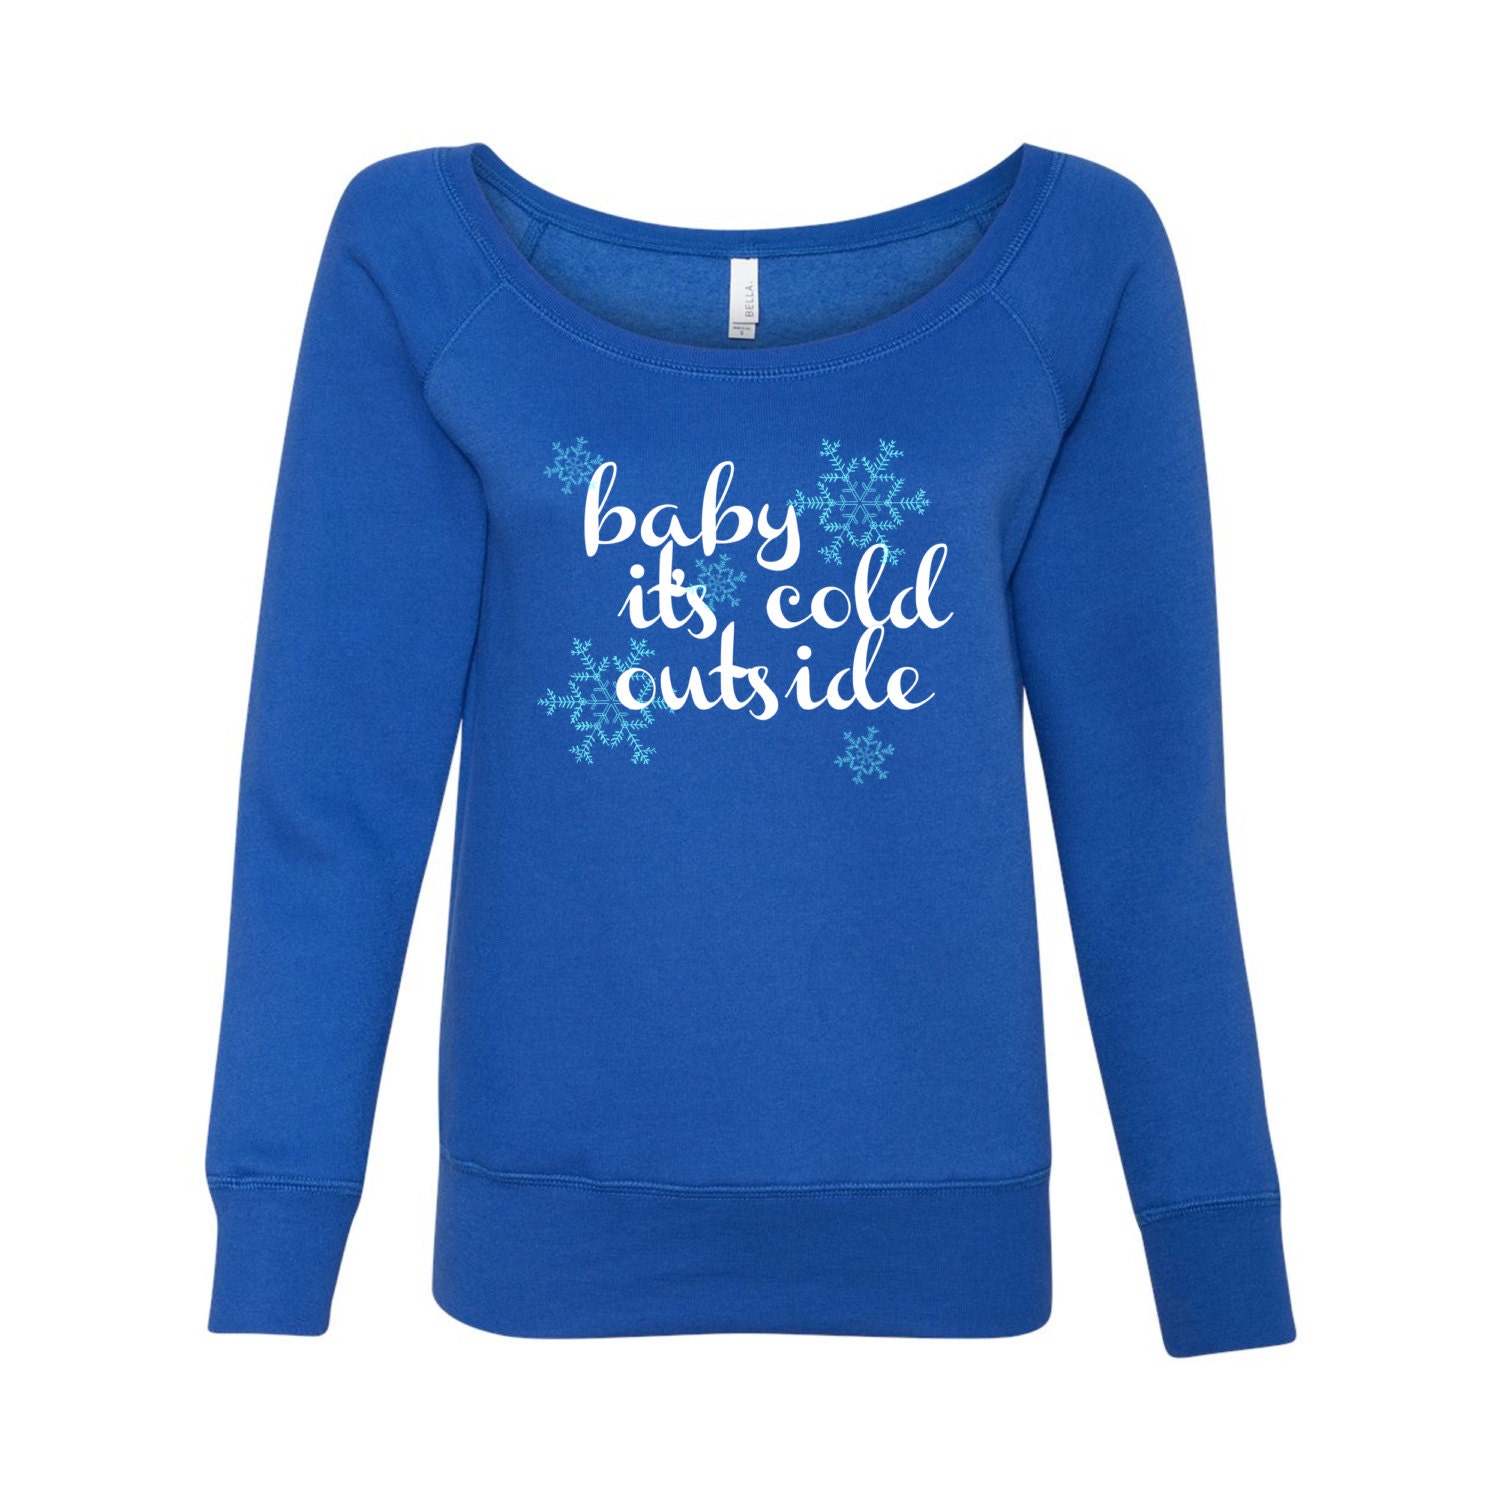 SALE Baby It's Cold Outside / royal blue loose fit